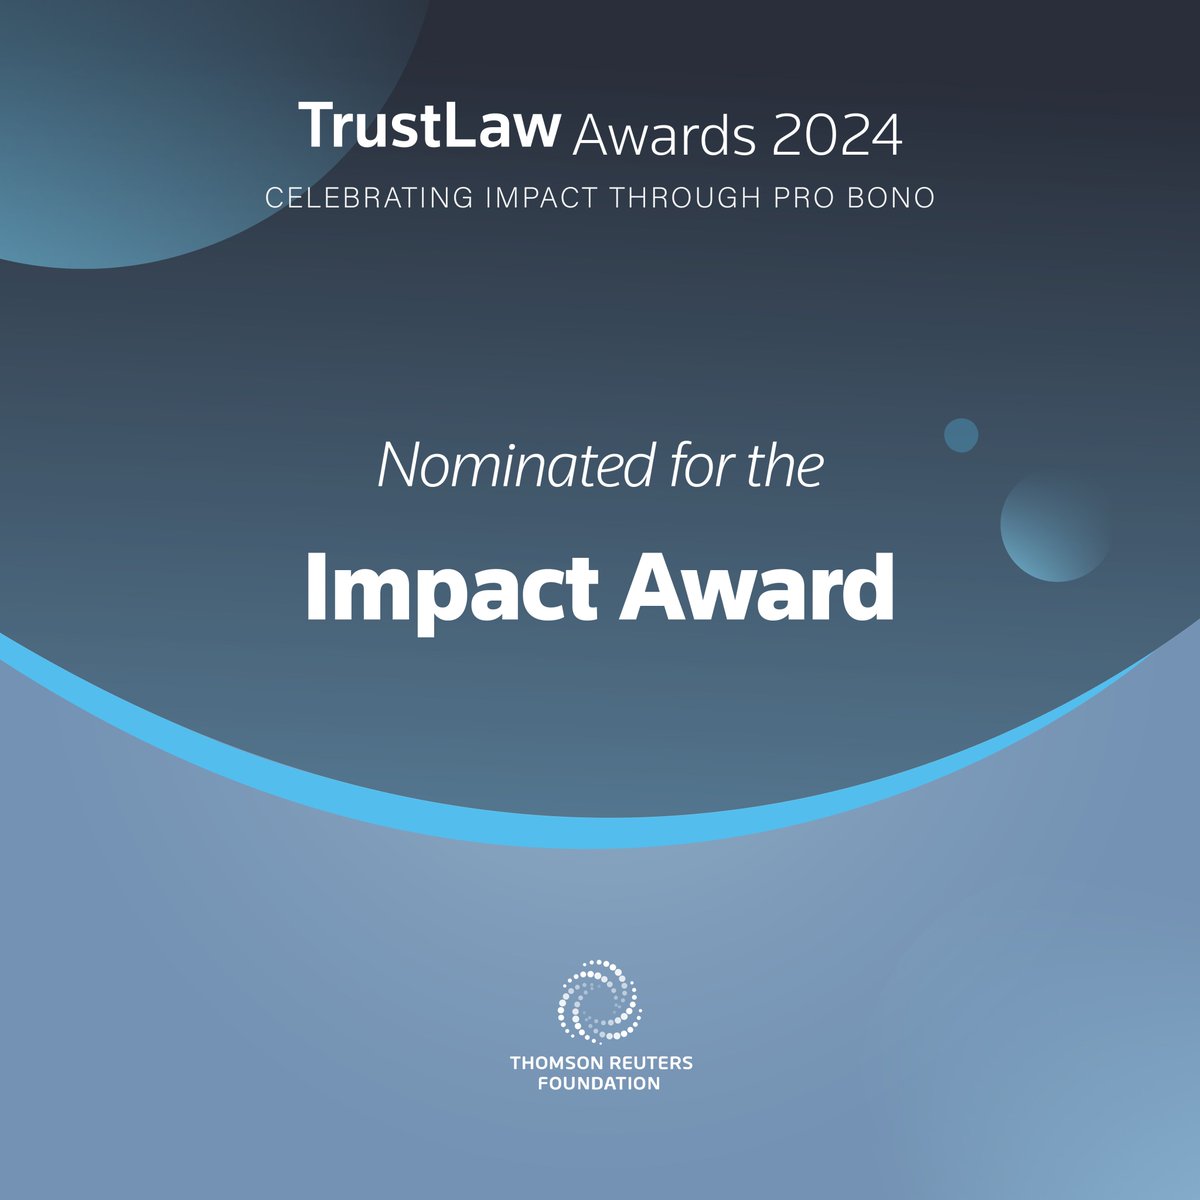 🌎 As the world faces multiple converging crises, legal pro bono has been key to tackling these challenges. Meet the nominees in the #TrustLawAwards Impact category, whose outstanding legal research has delivered real change. 🧵 tmsnrt.rs/3W9XaMD